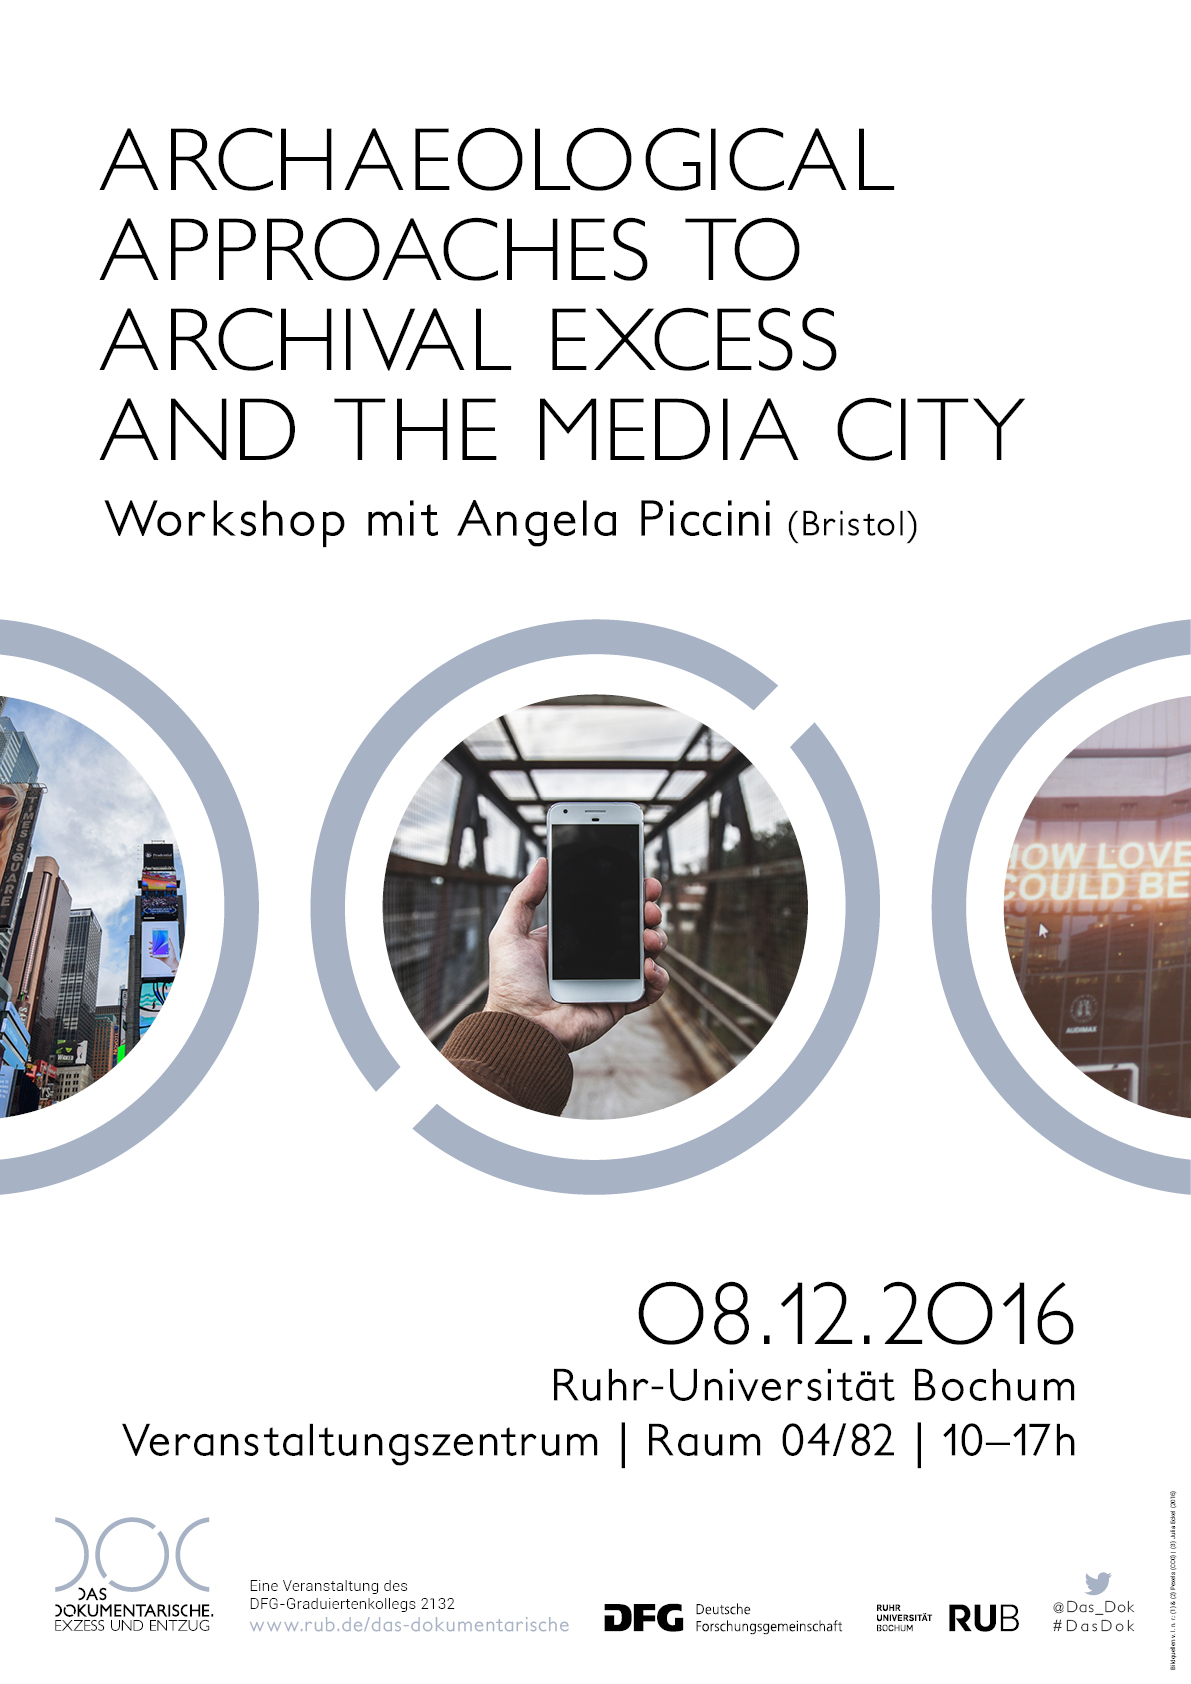 Archaeological Approaches to Archival Excess and the Media City | Workshop mit Angela Piccini